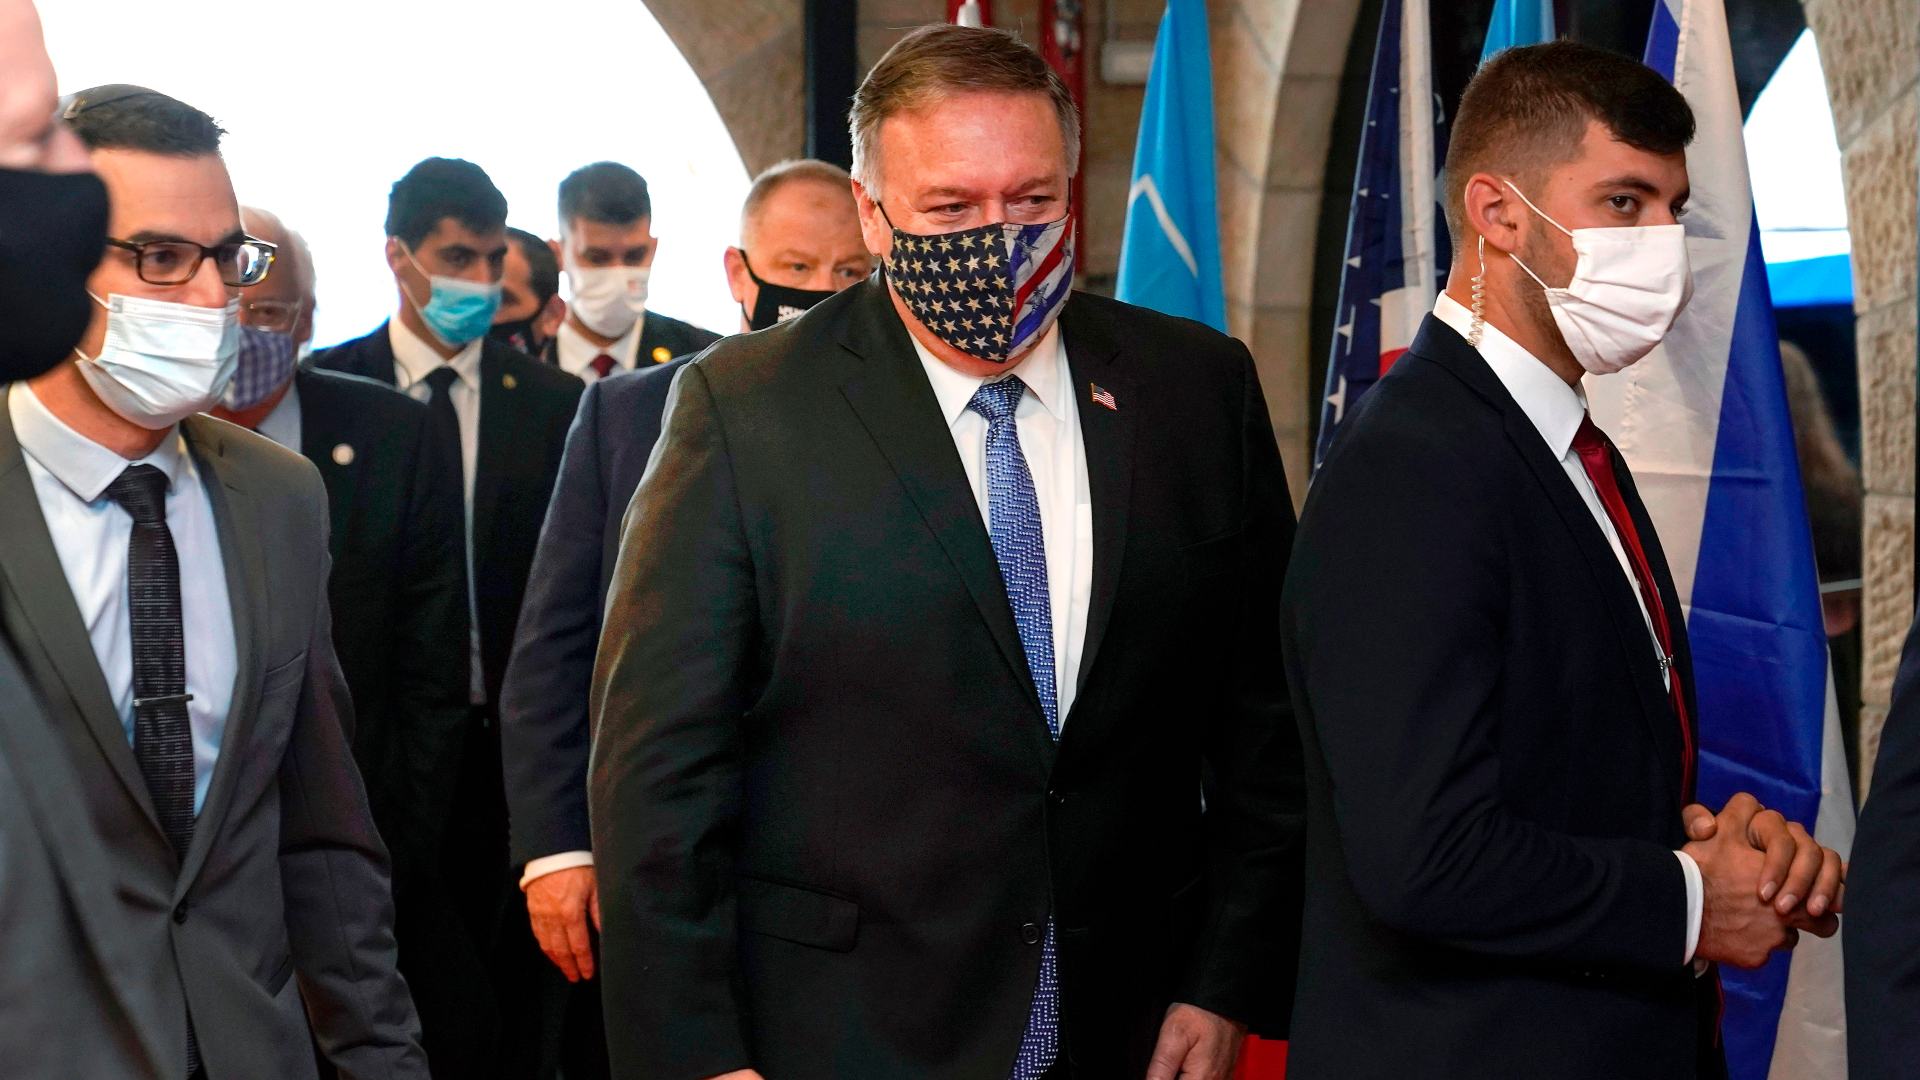 Pompeo visits Israel museum honouring Christian Zionists